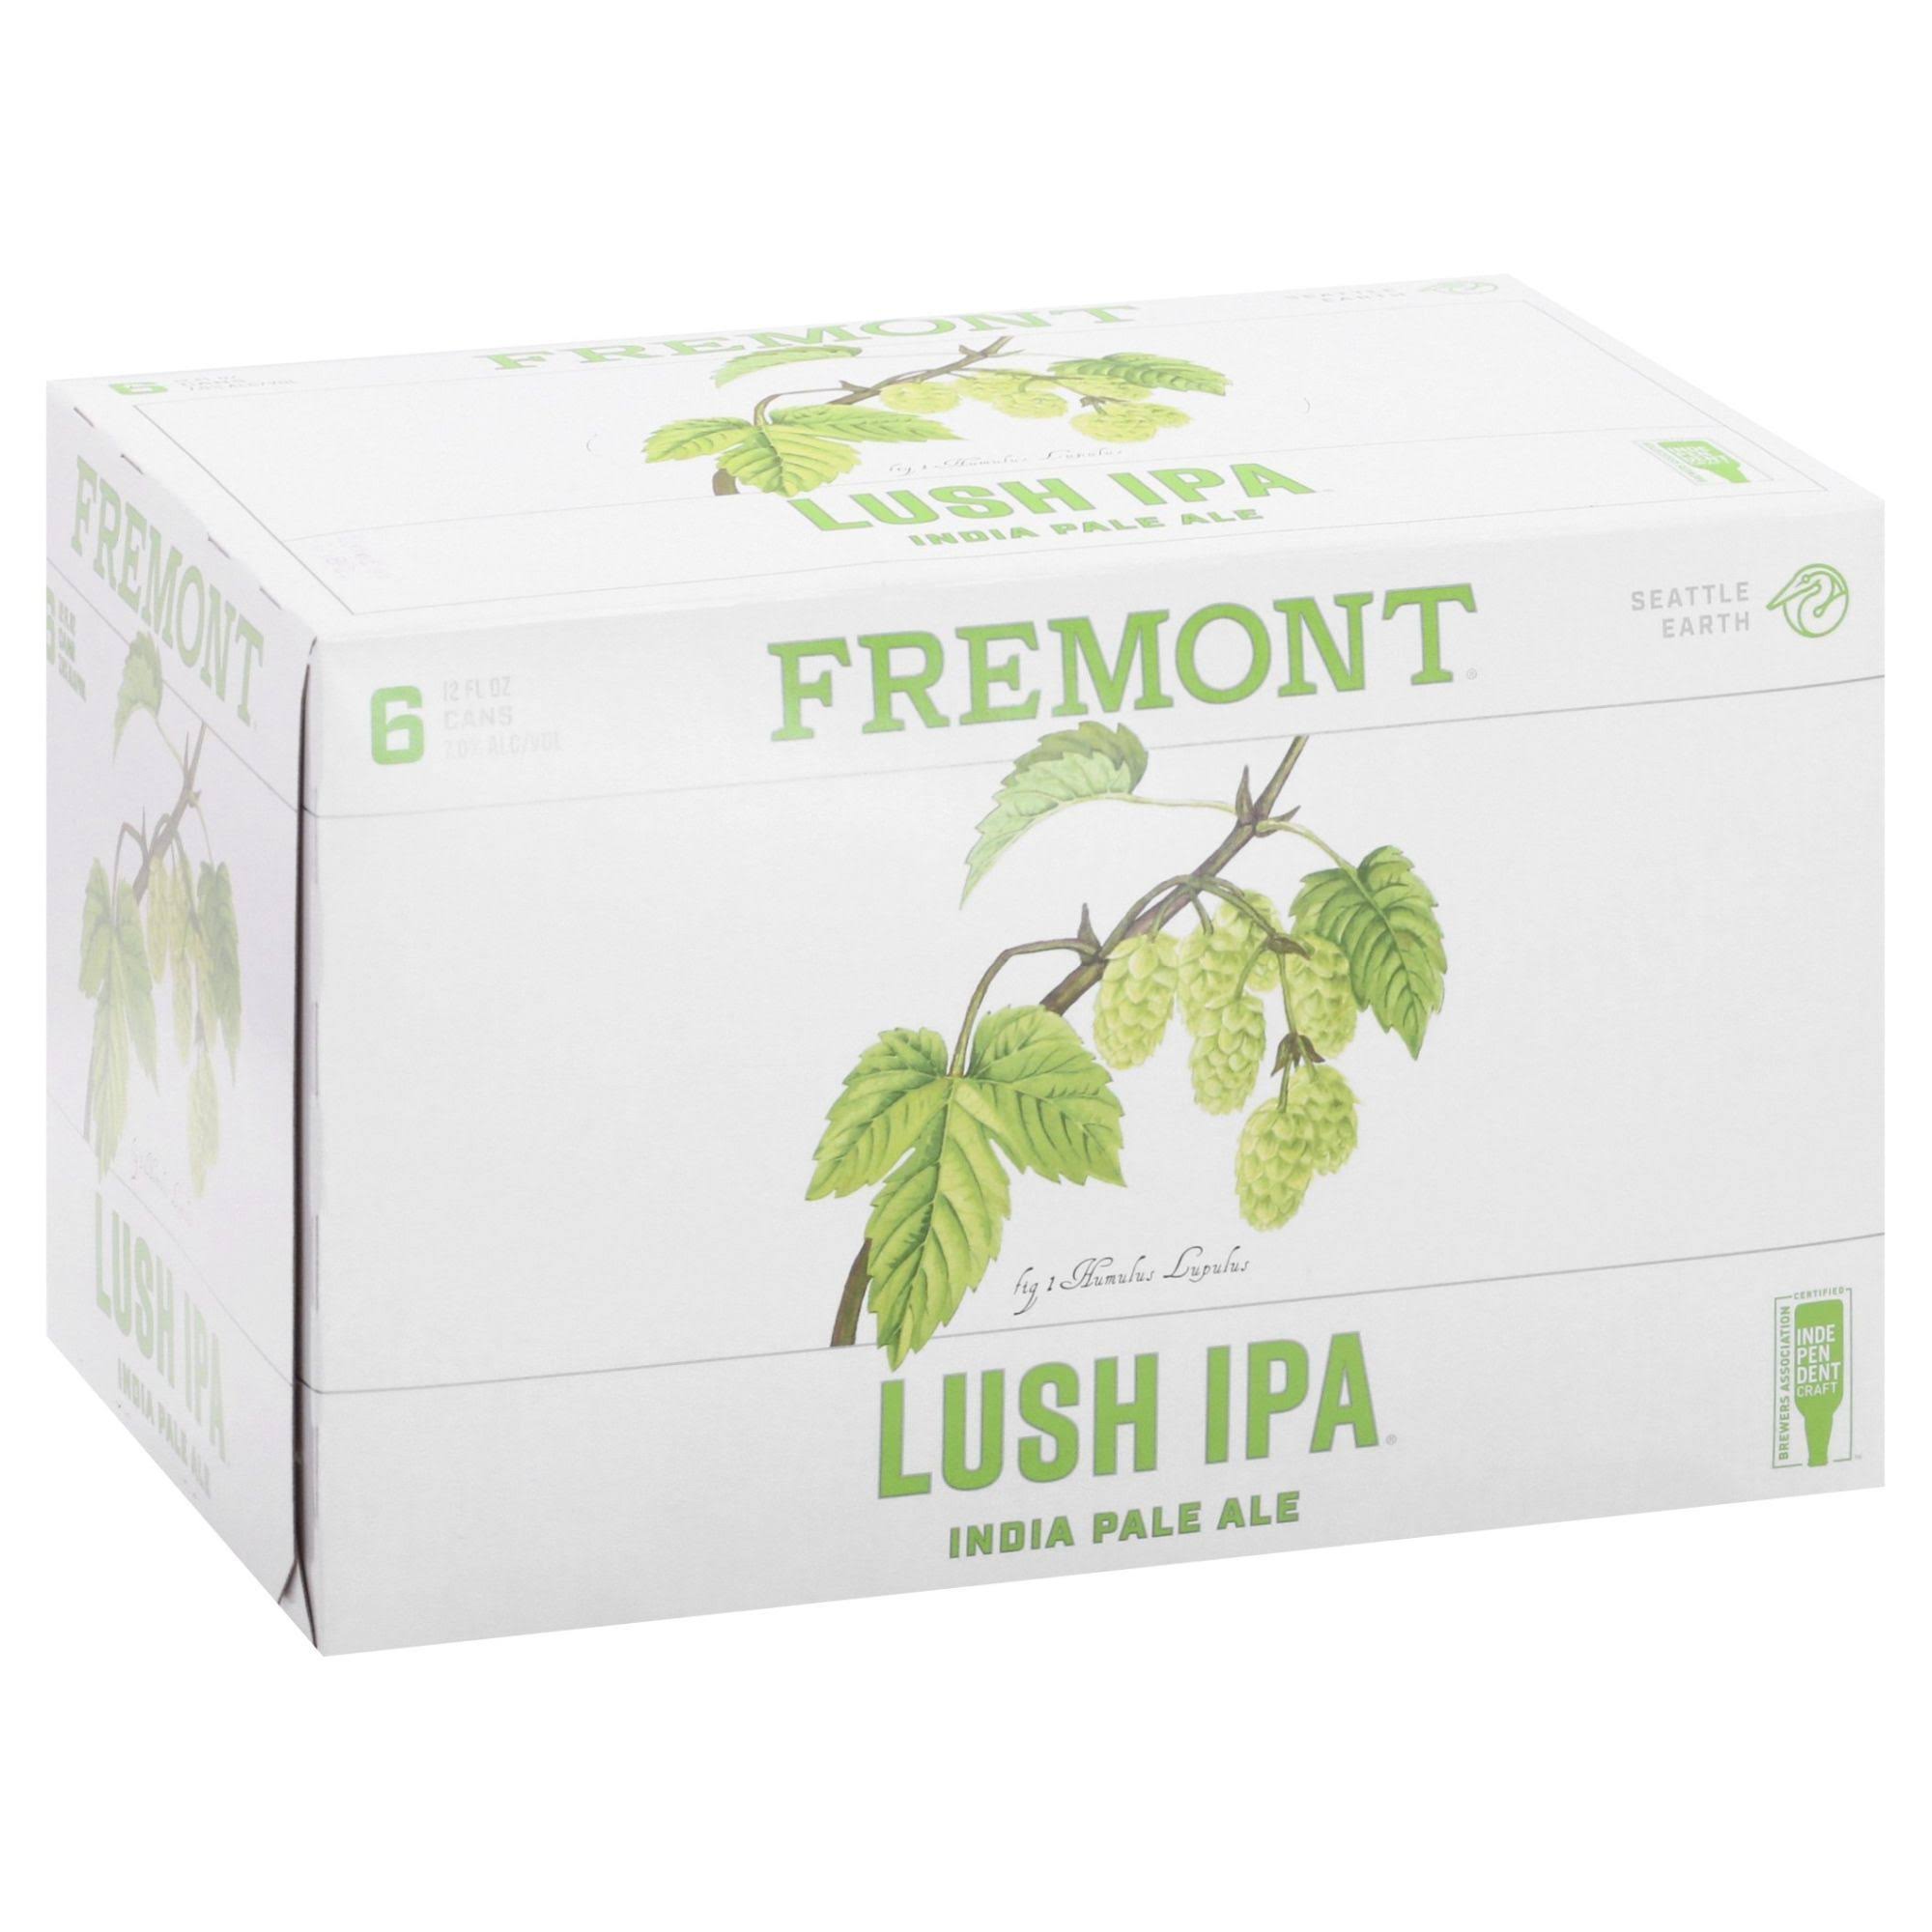 Fremont Beer, Lush IPA - 6 pack, 12 fl oz cans